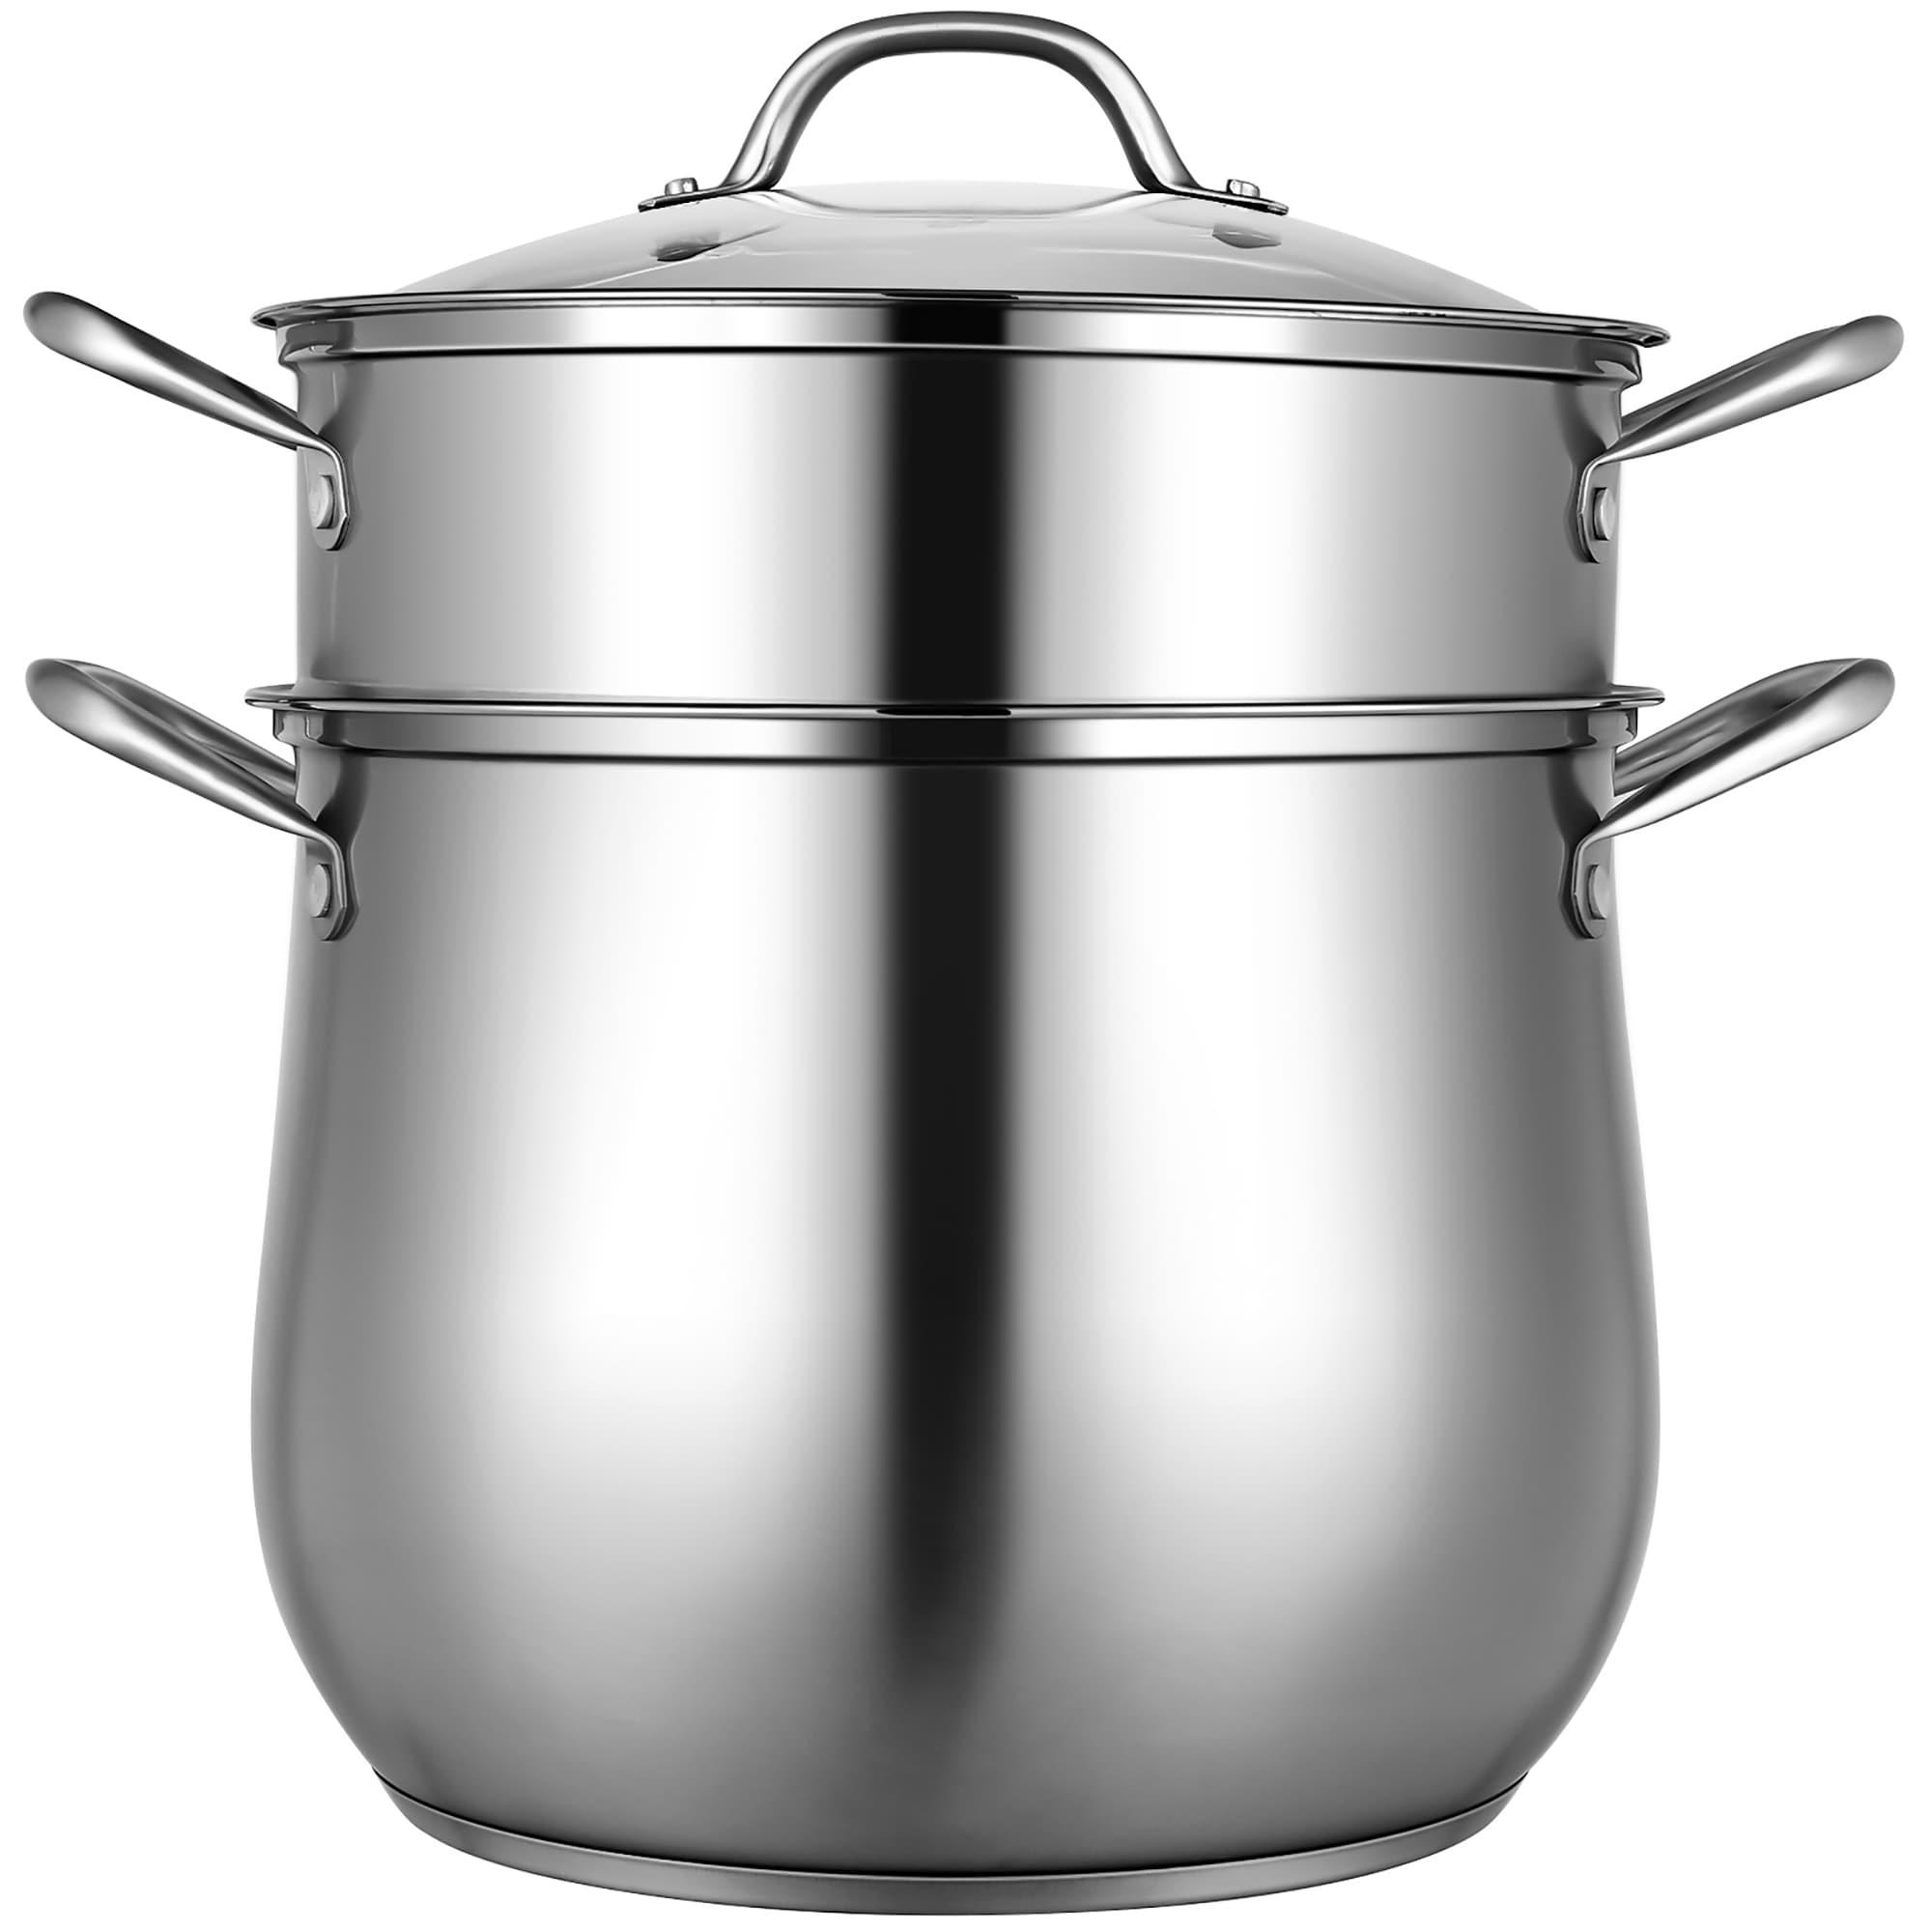 https://ak1.ostkcdn.com/images/products/is/images/direct/7bda2c53c9942856a5eaba7edd29489322b75626/Costway-2-Tier-Steamer-Pot-Saucepot-Stainless-Steel-w--Tempered-Glass.jpg